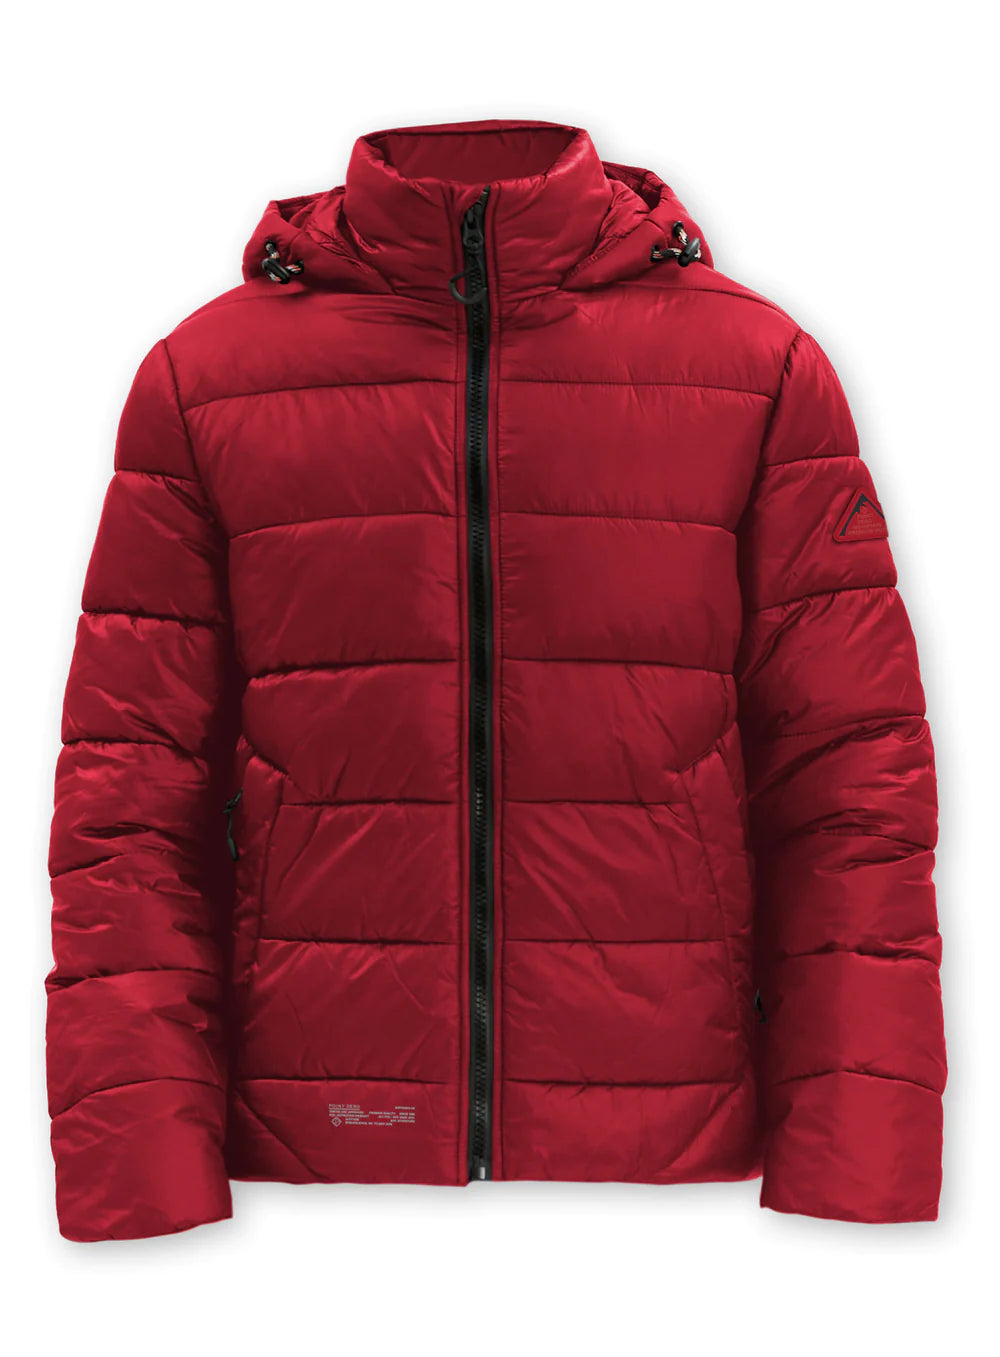 EDDISION Midweight Ultralight Jacket - Red